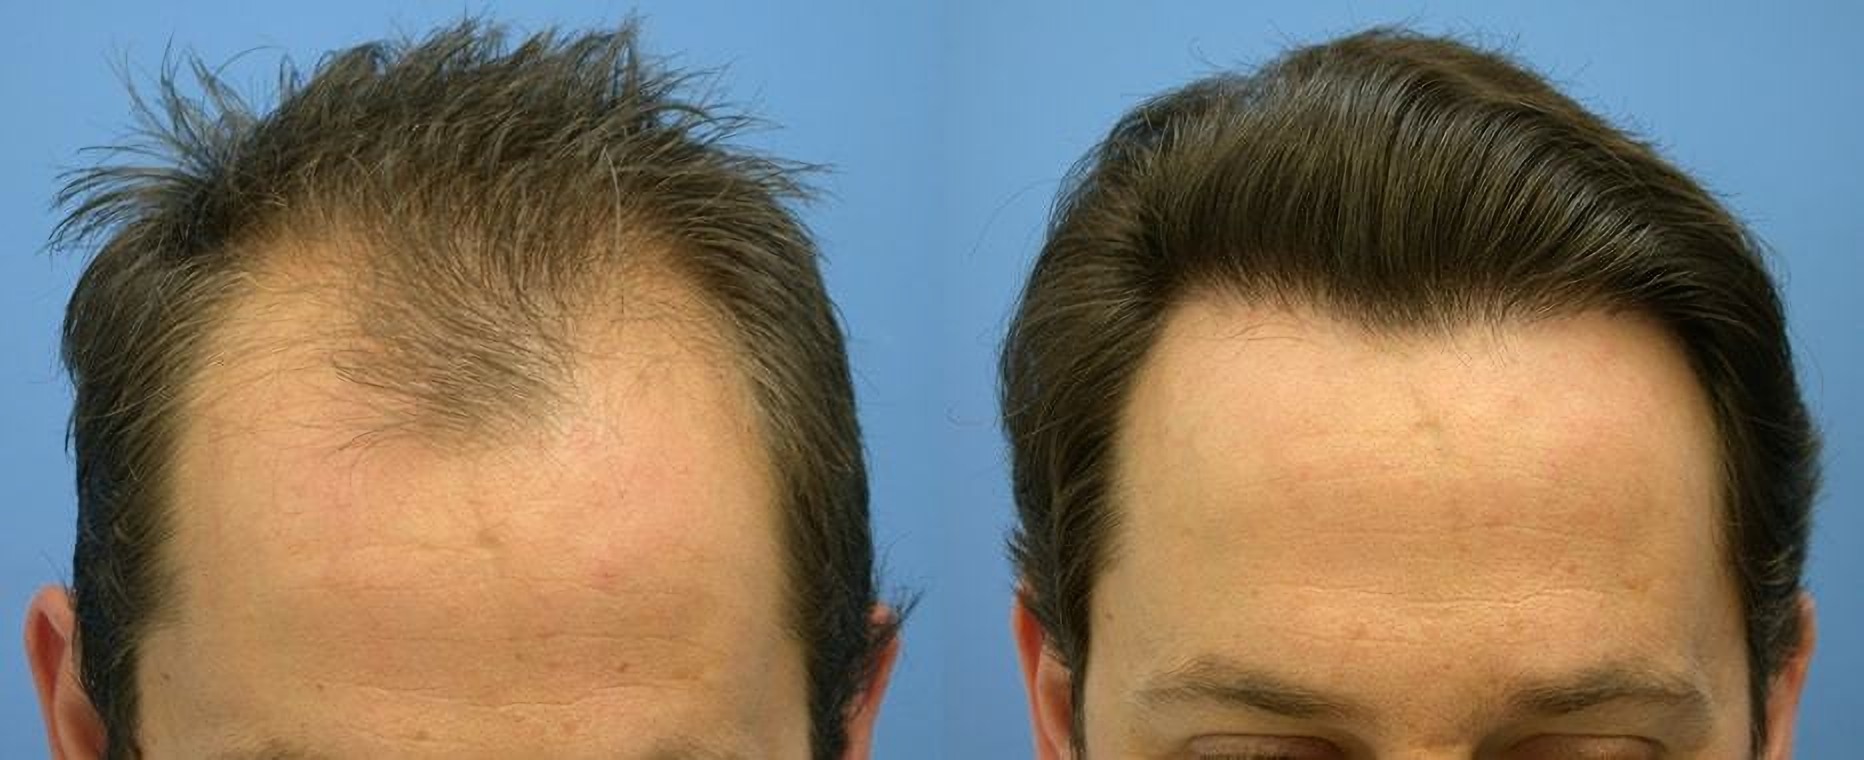 Before and After Hair Transplant in Istanbul